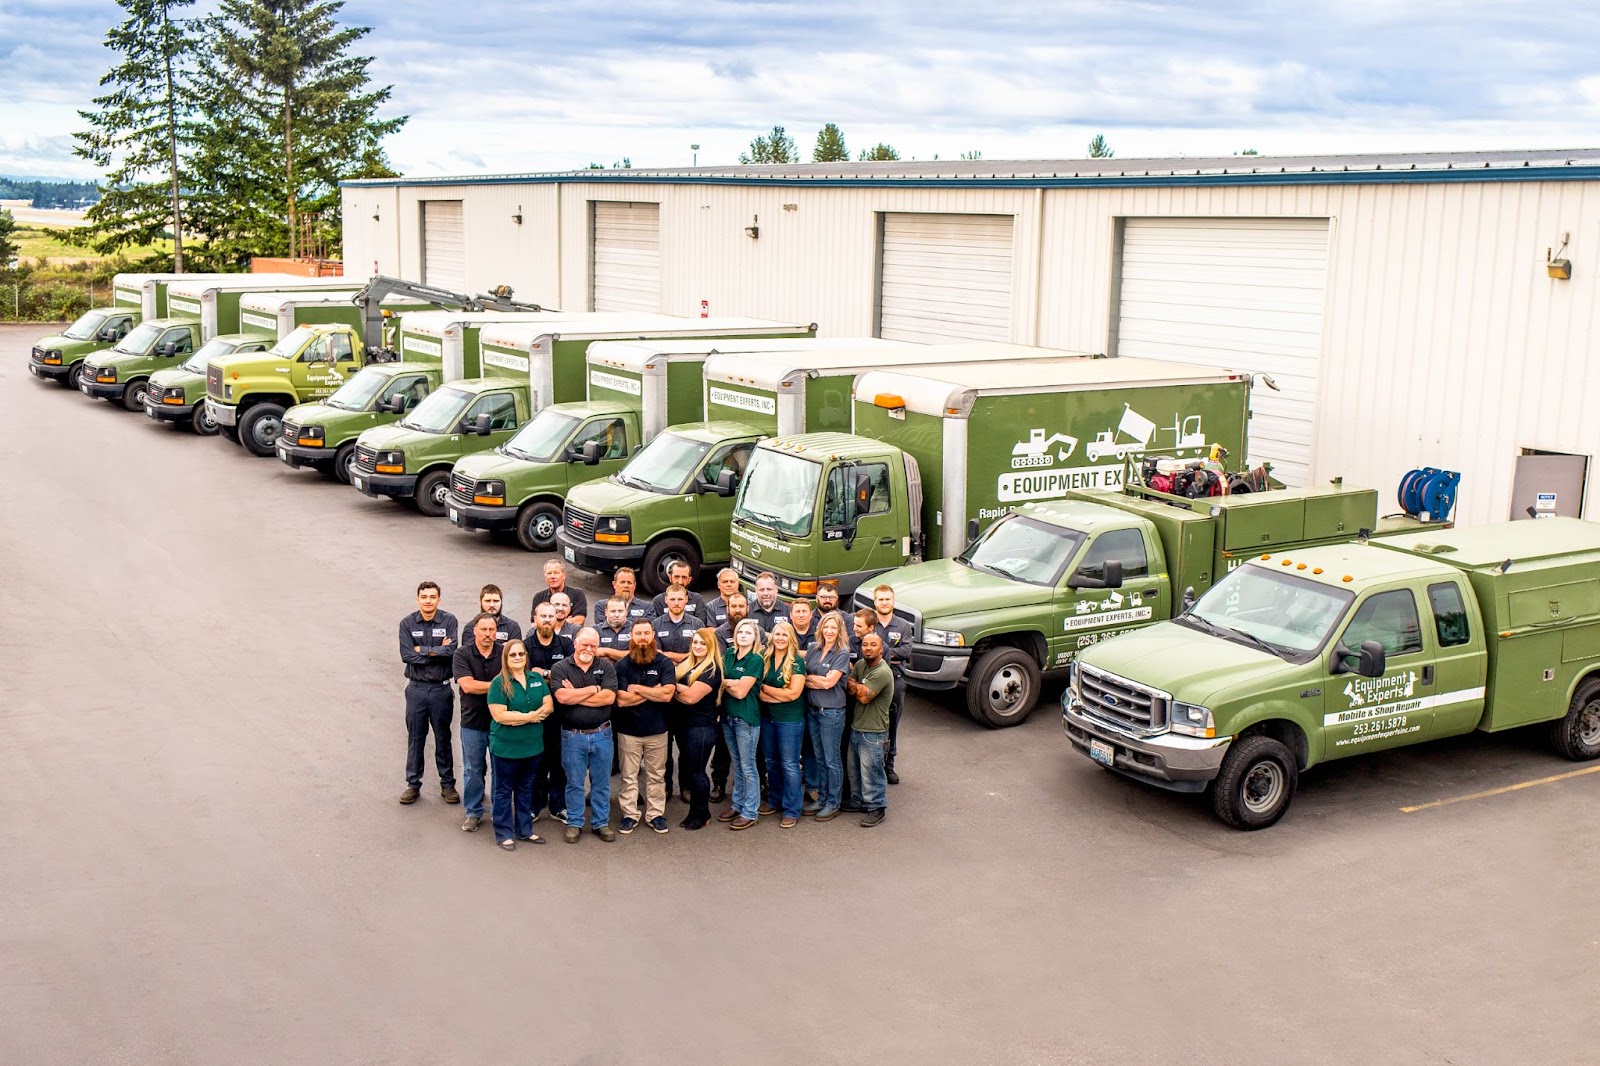 An aerial view of the Equipment Experts, Inc. team in front of their fleet of trucks